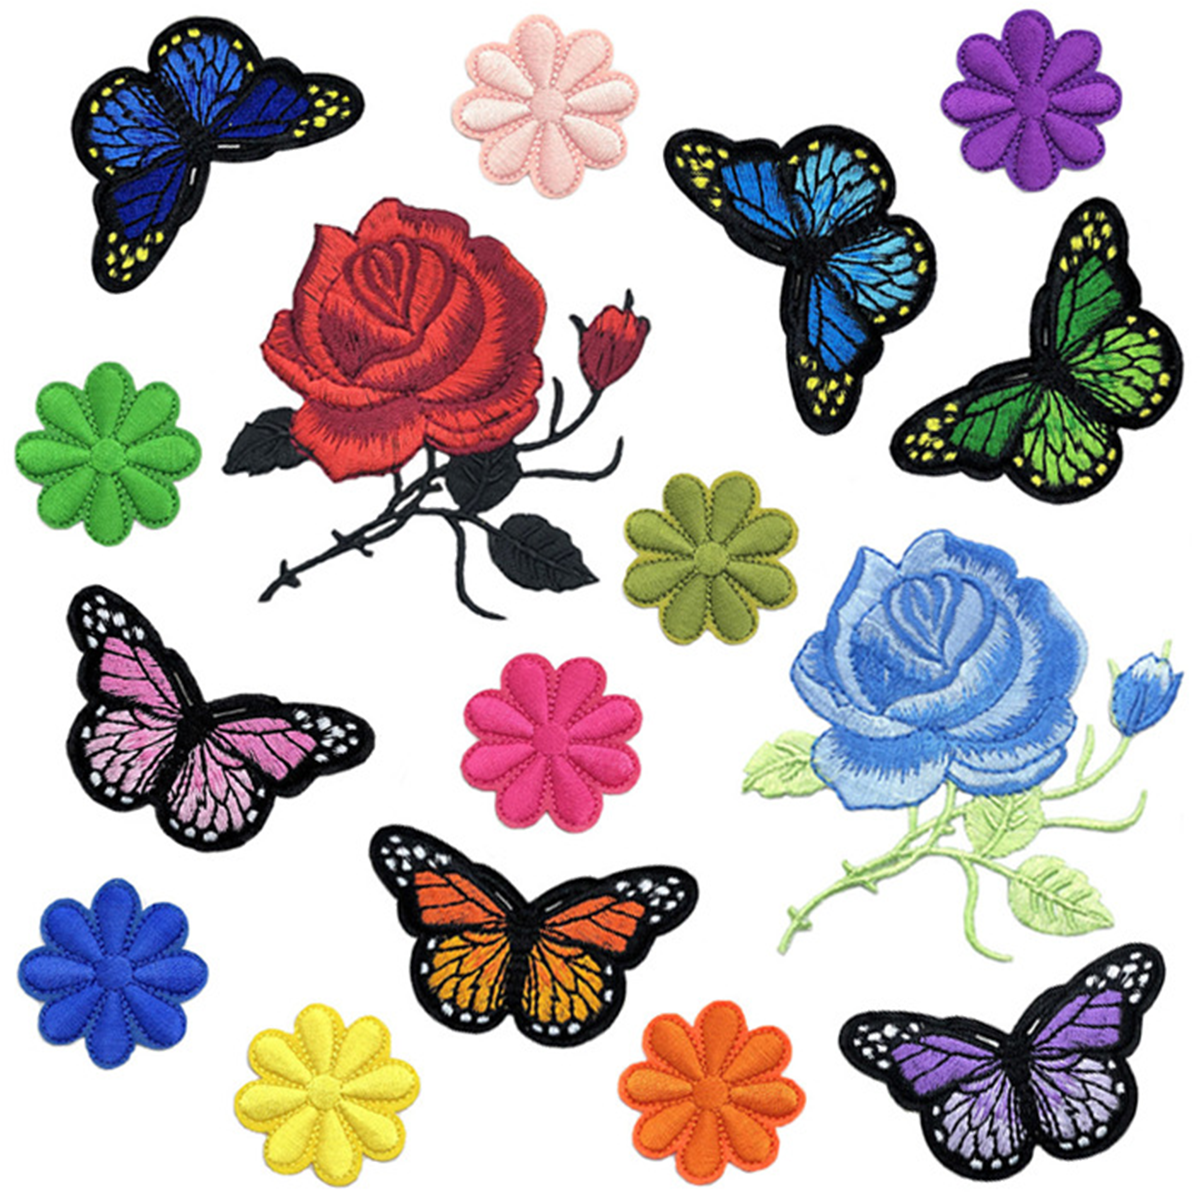 Sew on Patches 6pcs, Colorful Insect Design Embroidered Sewing Patches with  Sequins Embroidered Appliques Patches for Crafting Clothing Dress Applique